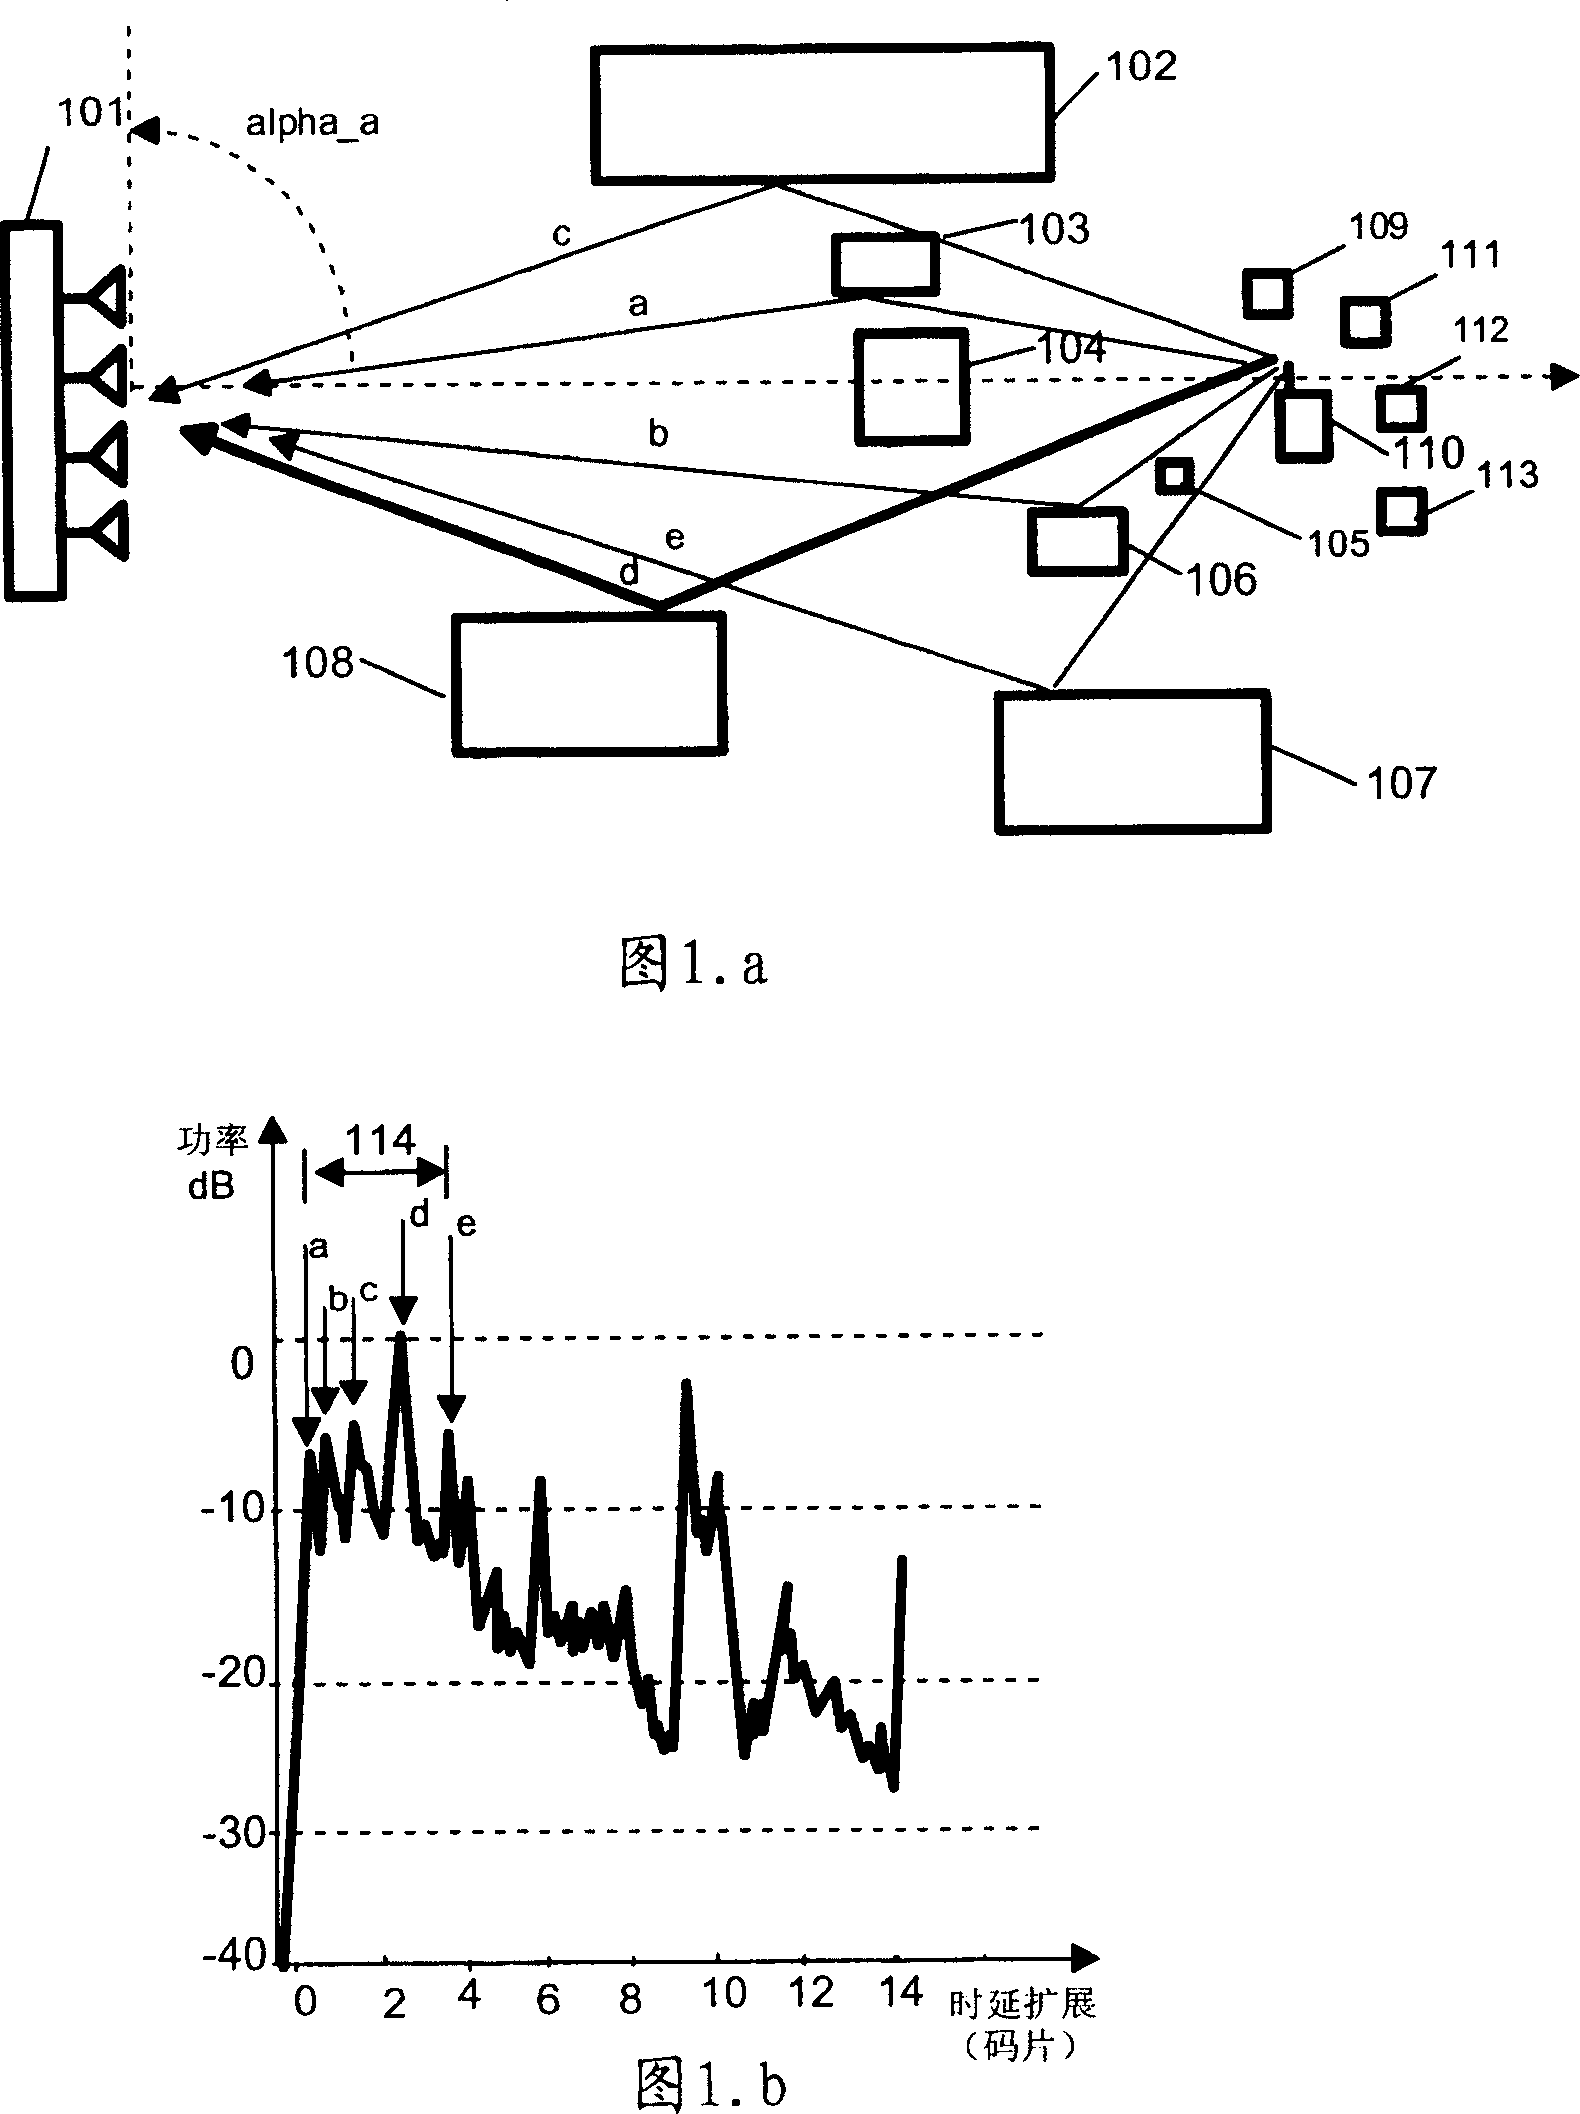 Angle evaluating method for restraining multi-path influence